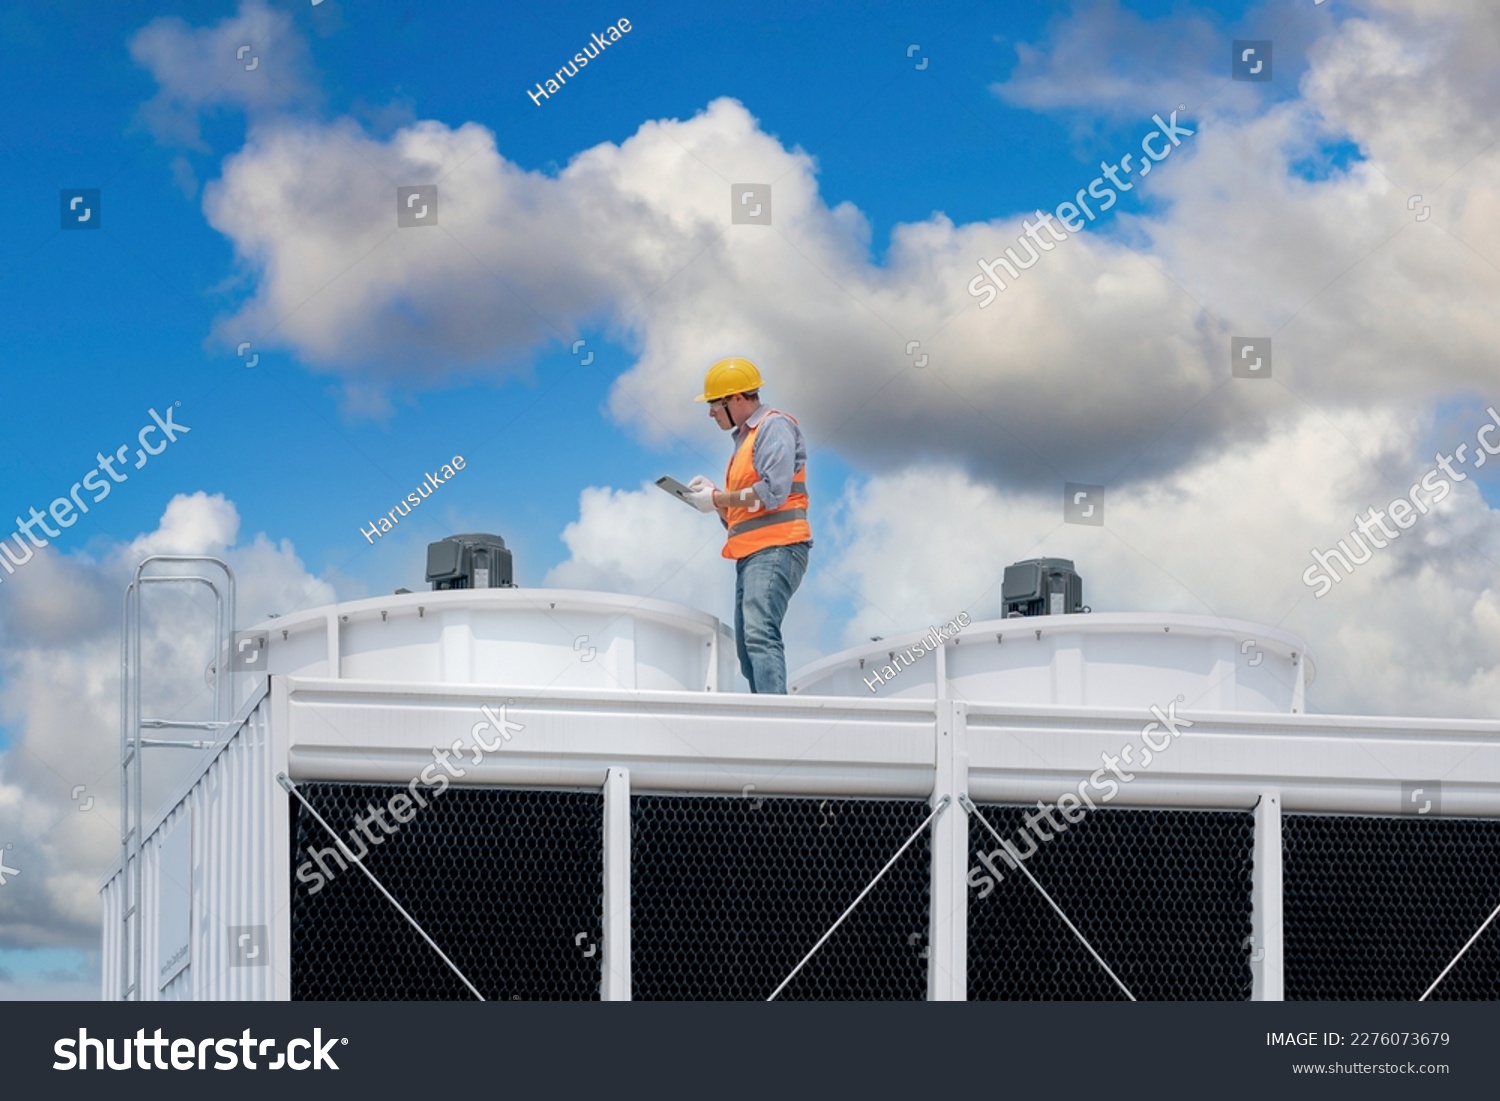 Industry engineer under checking the industry cooling tower air conditioner is water cooling tower air chiller HVAC of large industrial building to control air system. #2276073679